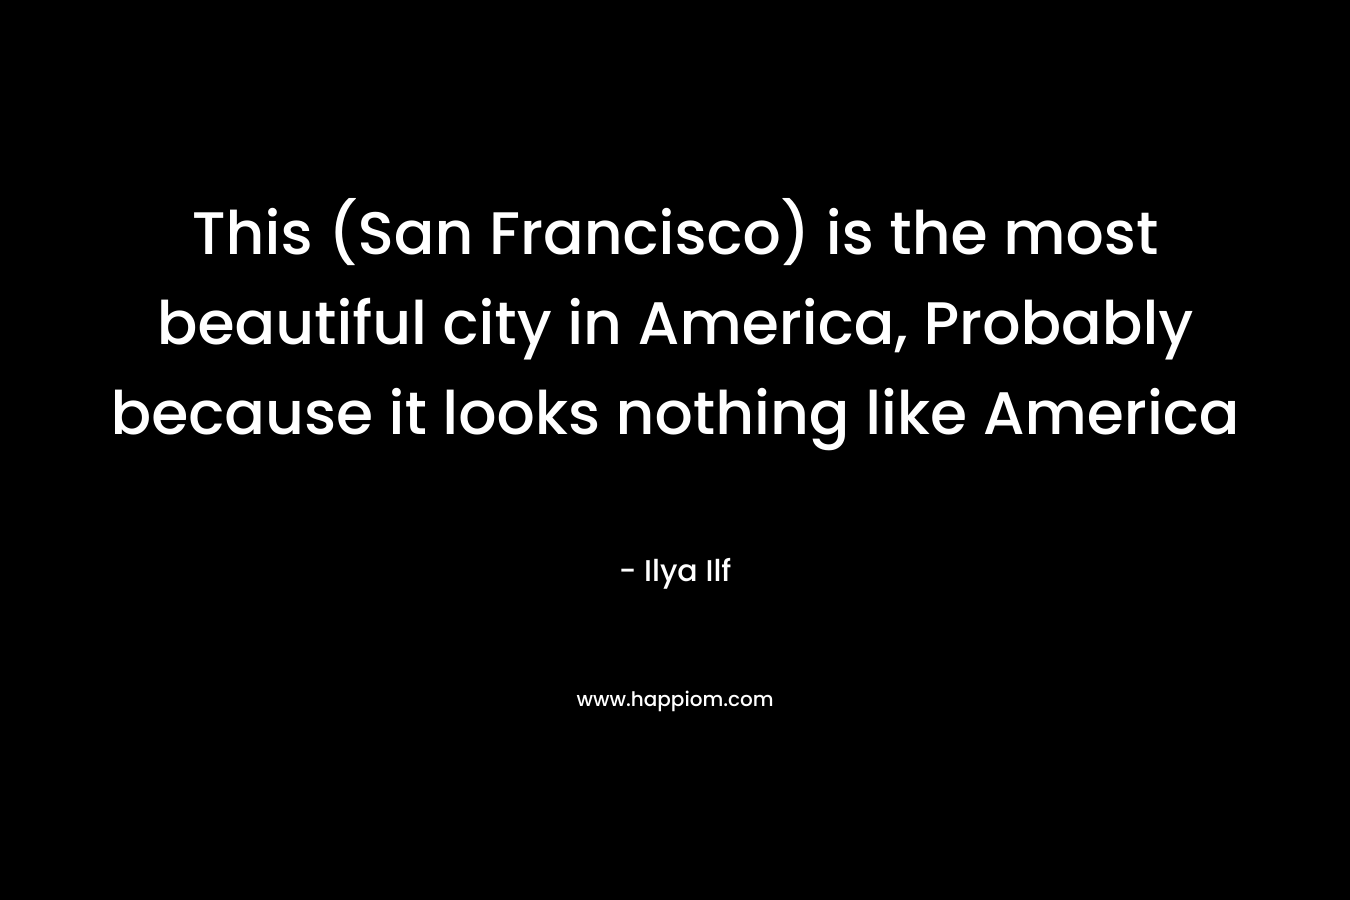 This (San Francisco) is the most beautiful city in America, Probably because it looks nothing like America – Ilya Ilf